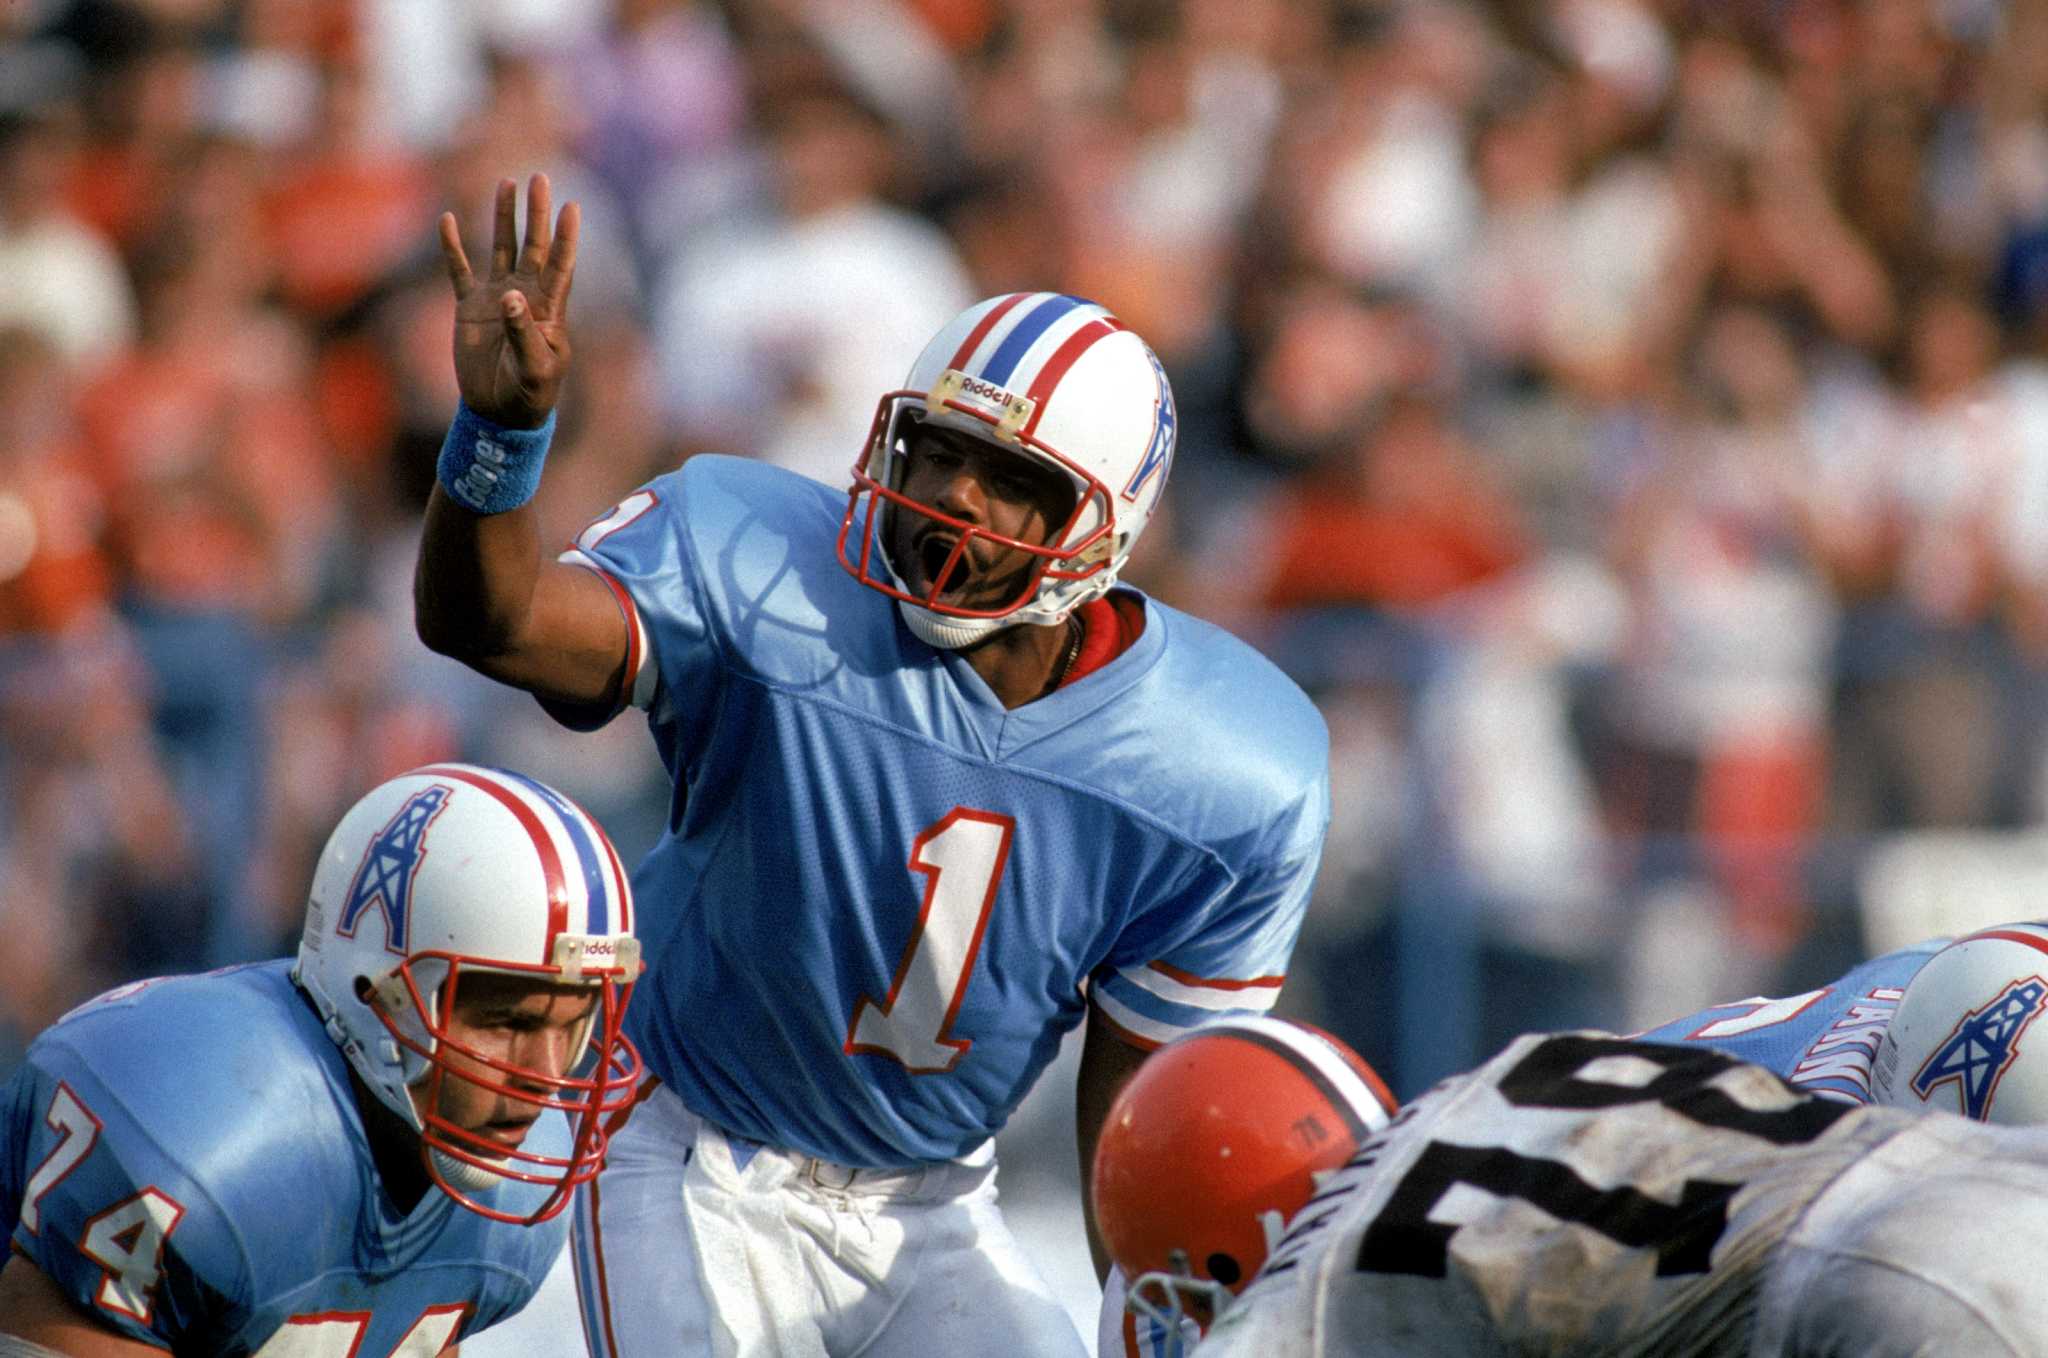 Should Houston Oilers history be returned to Houston?